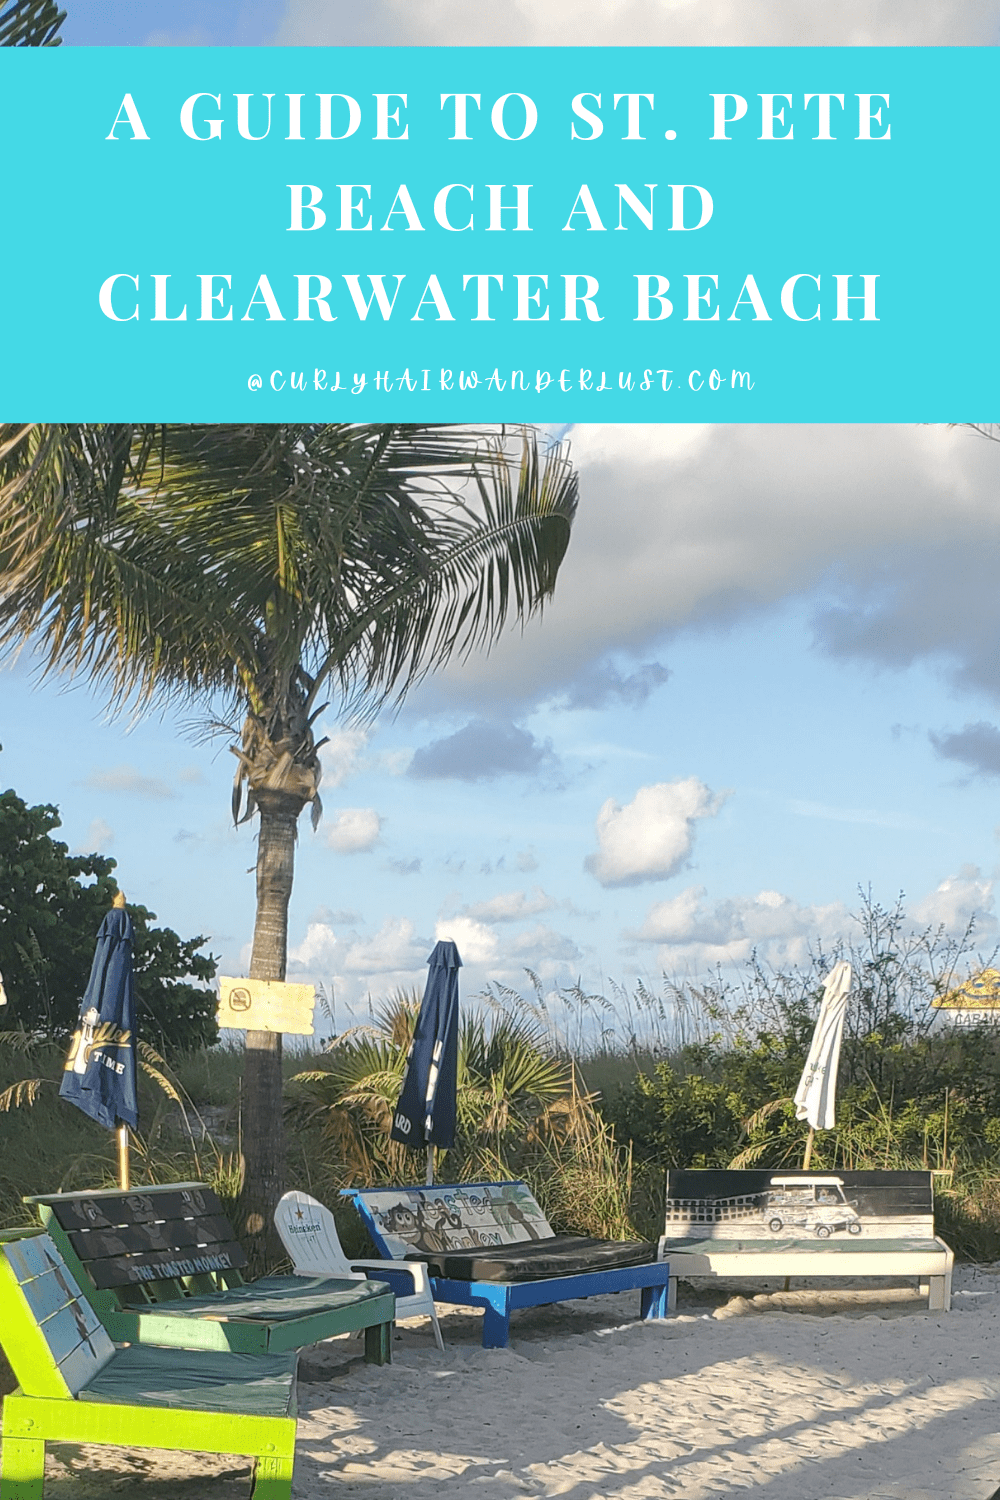 St pete beach and clearwater beach